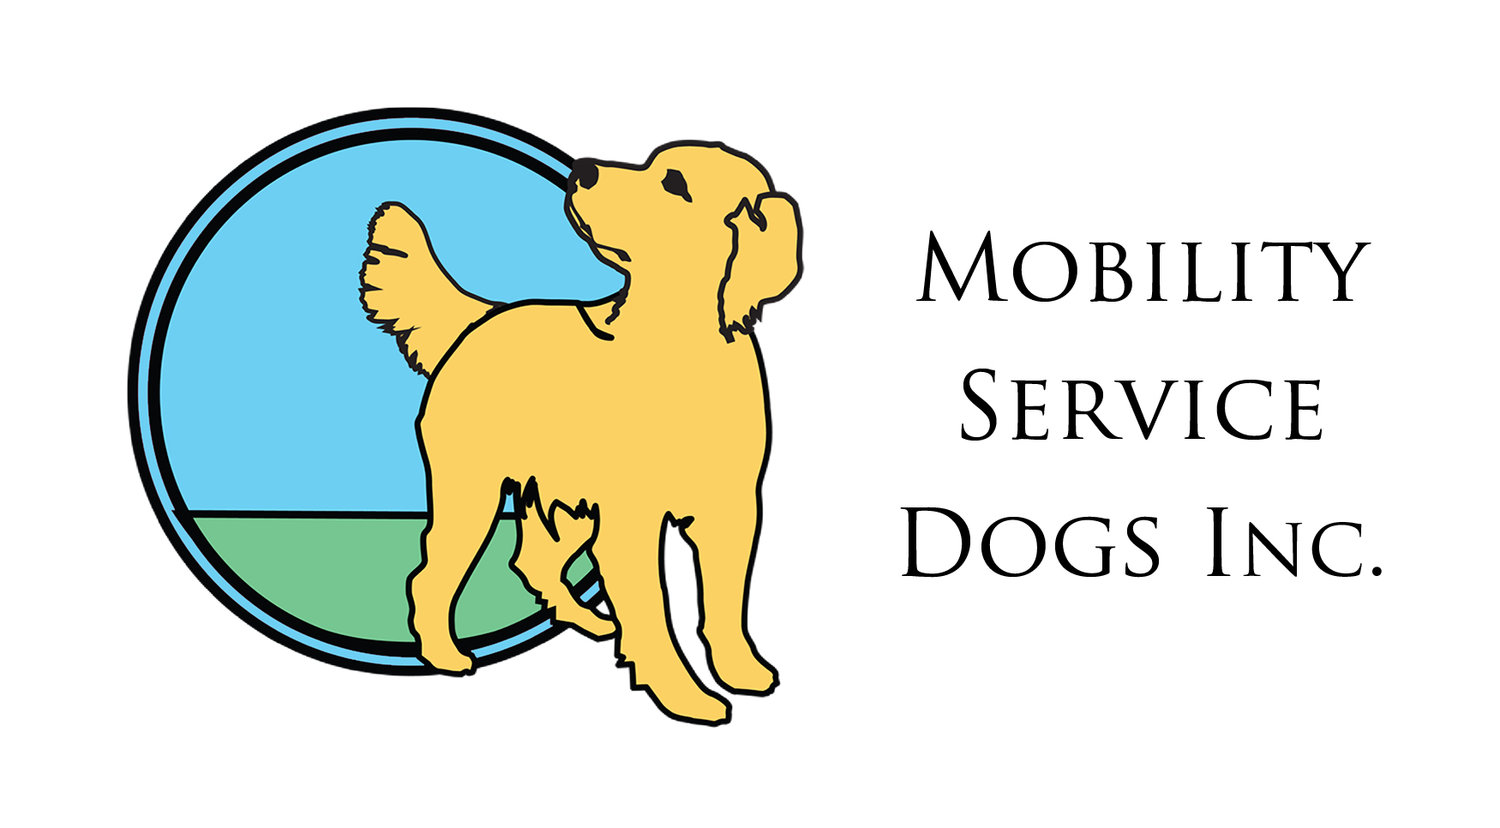 Mobility Service Dogs, Inc.